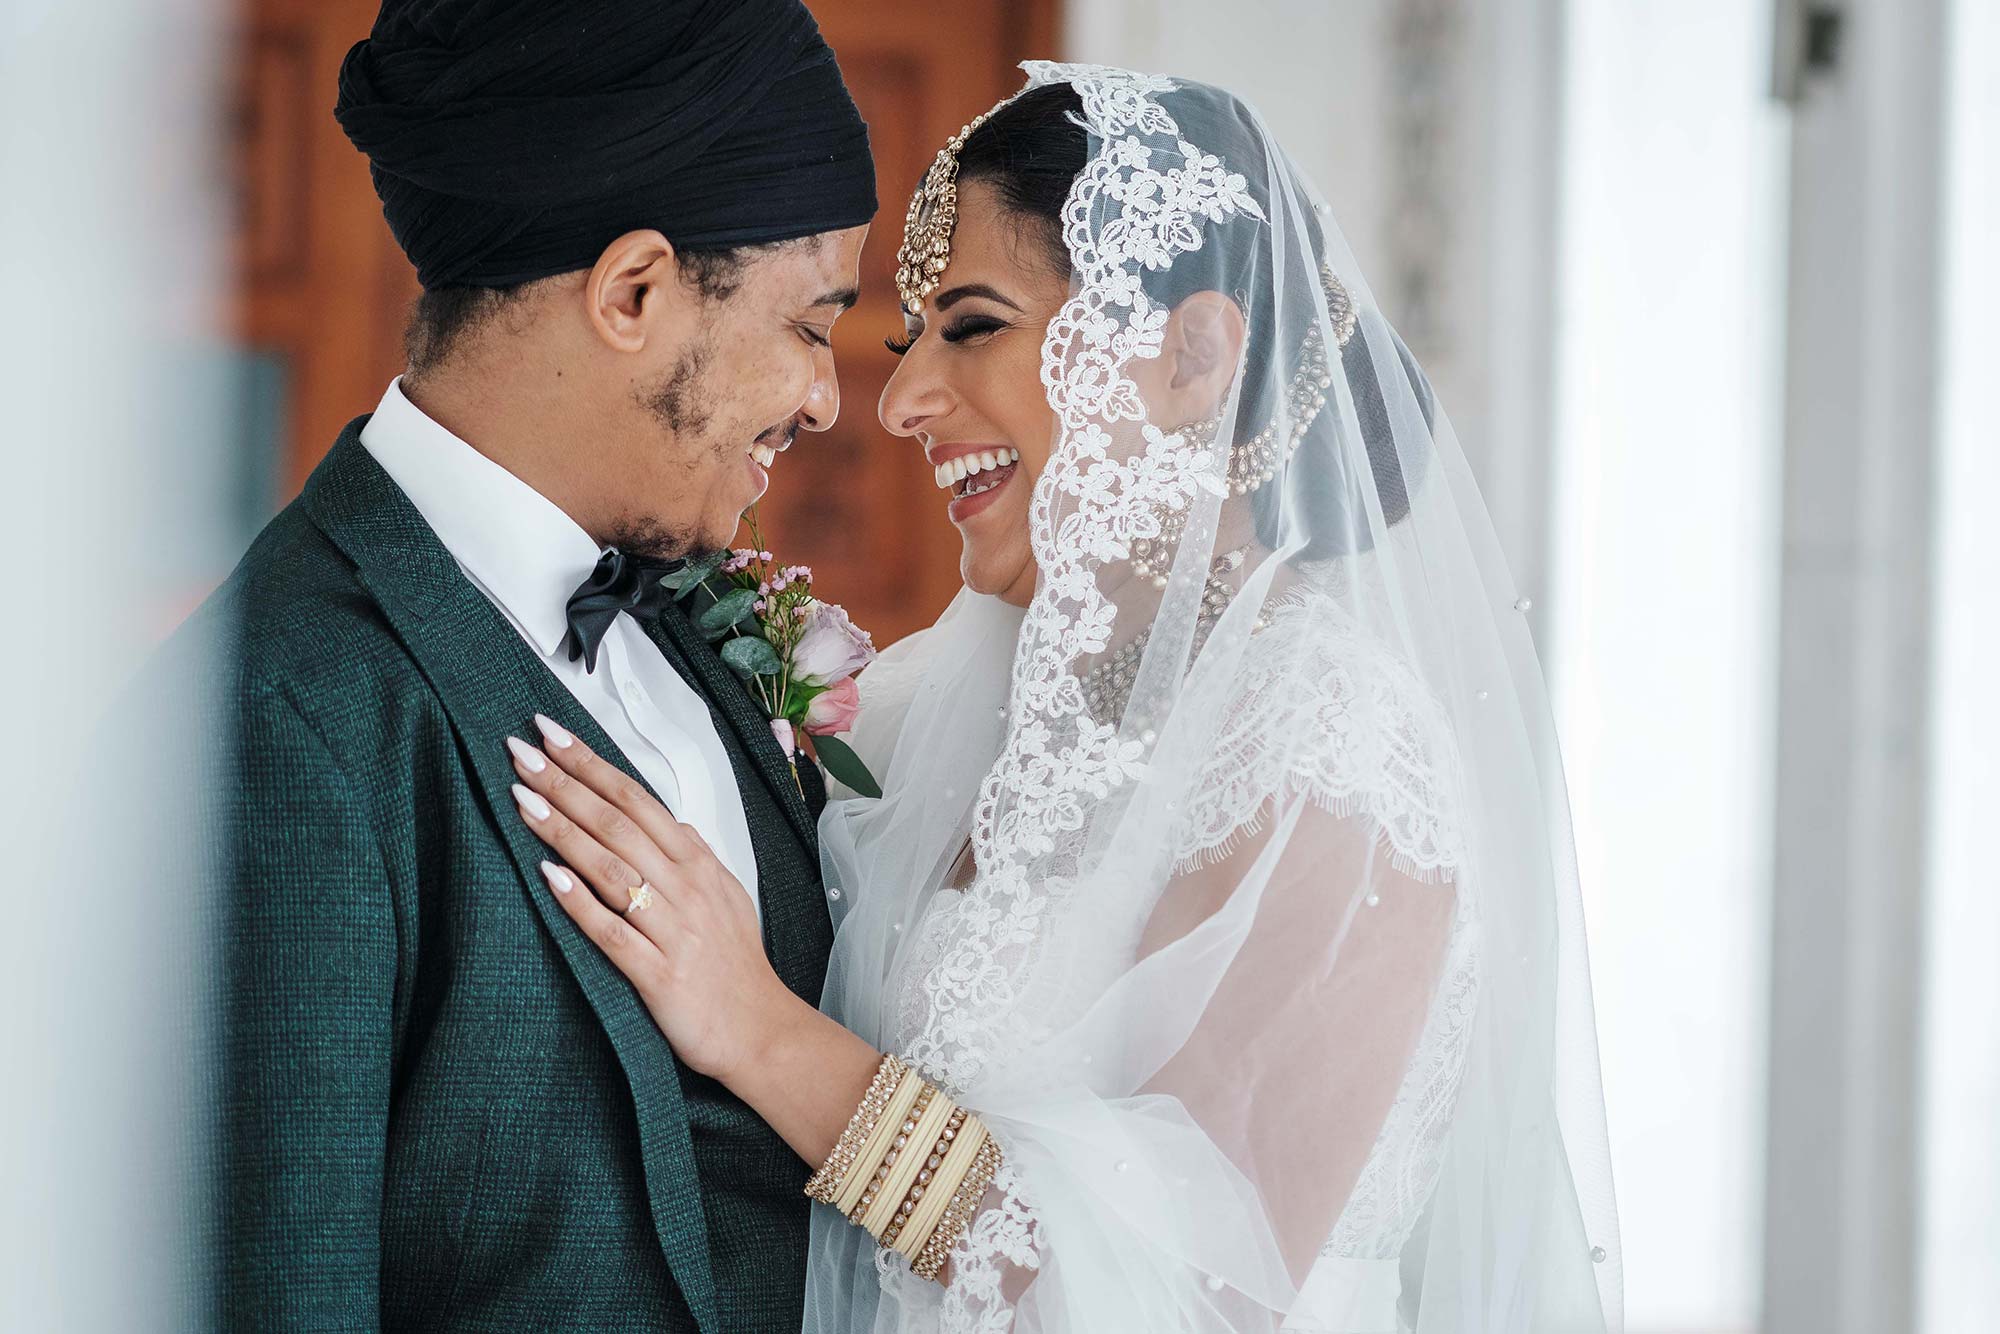 Groom and bride laughing and hugging. She's wearing a veil and has her hand on his chest. By Dorset wedding photographers Smiling Tiger Studios